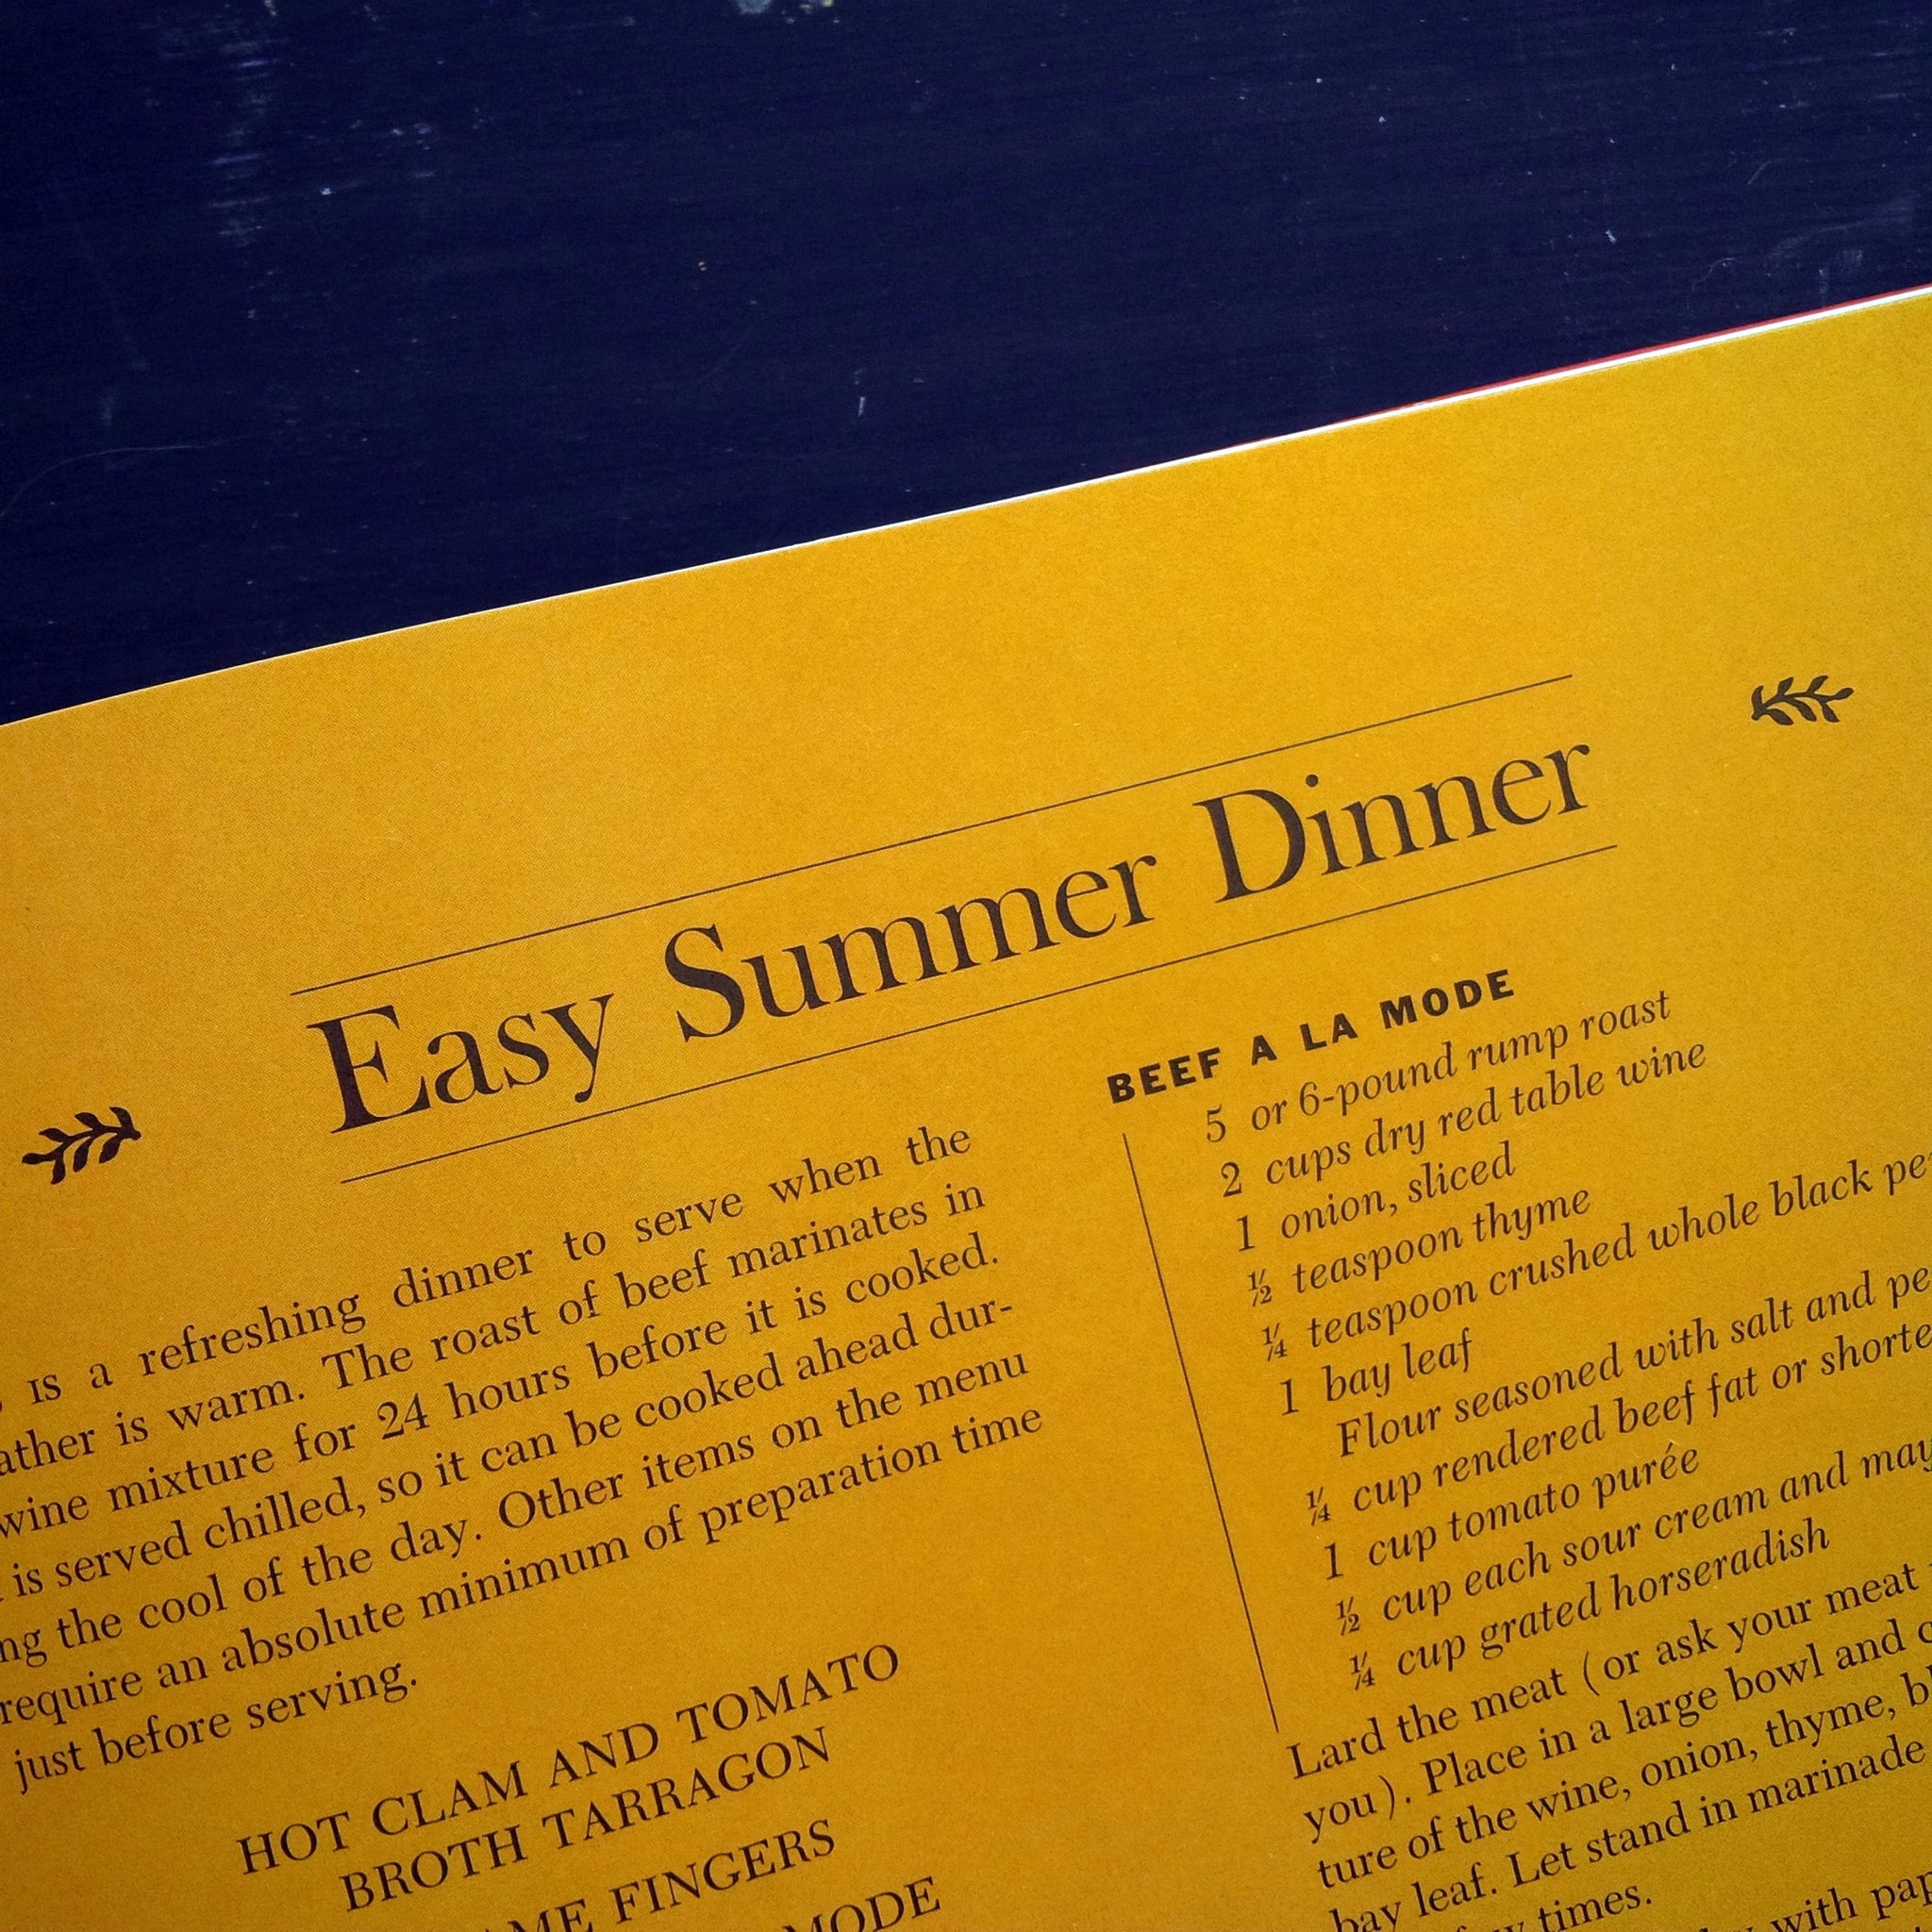 The Dinner Party Cook Book - Sunset Magazine - 1960's Holiday, Party and Theme Menu Cookbook